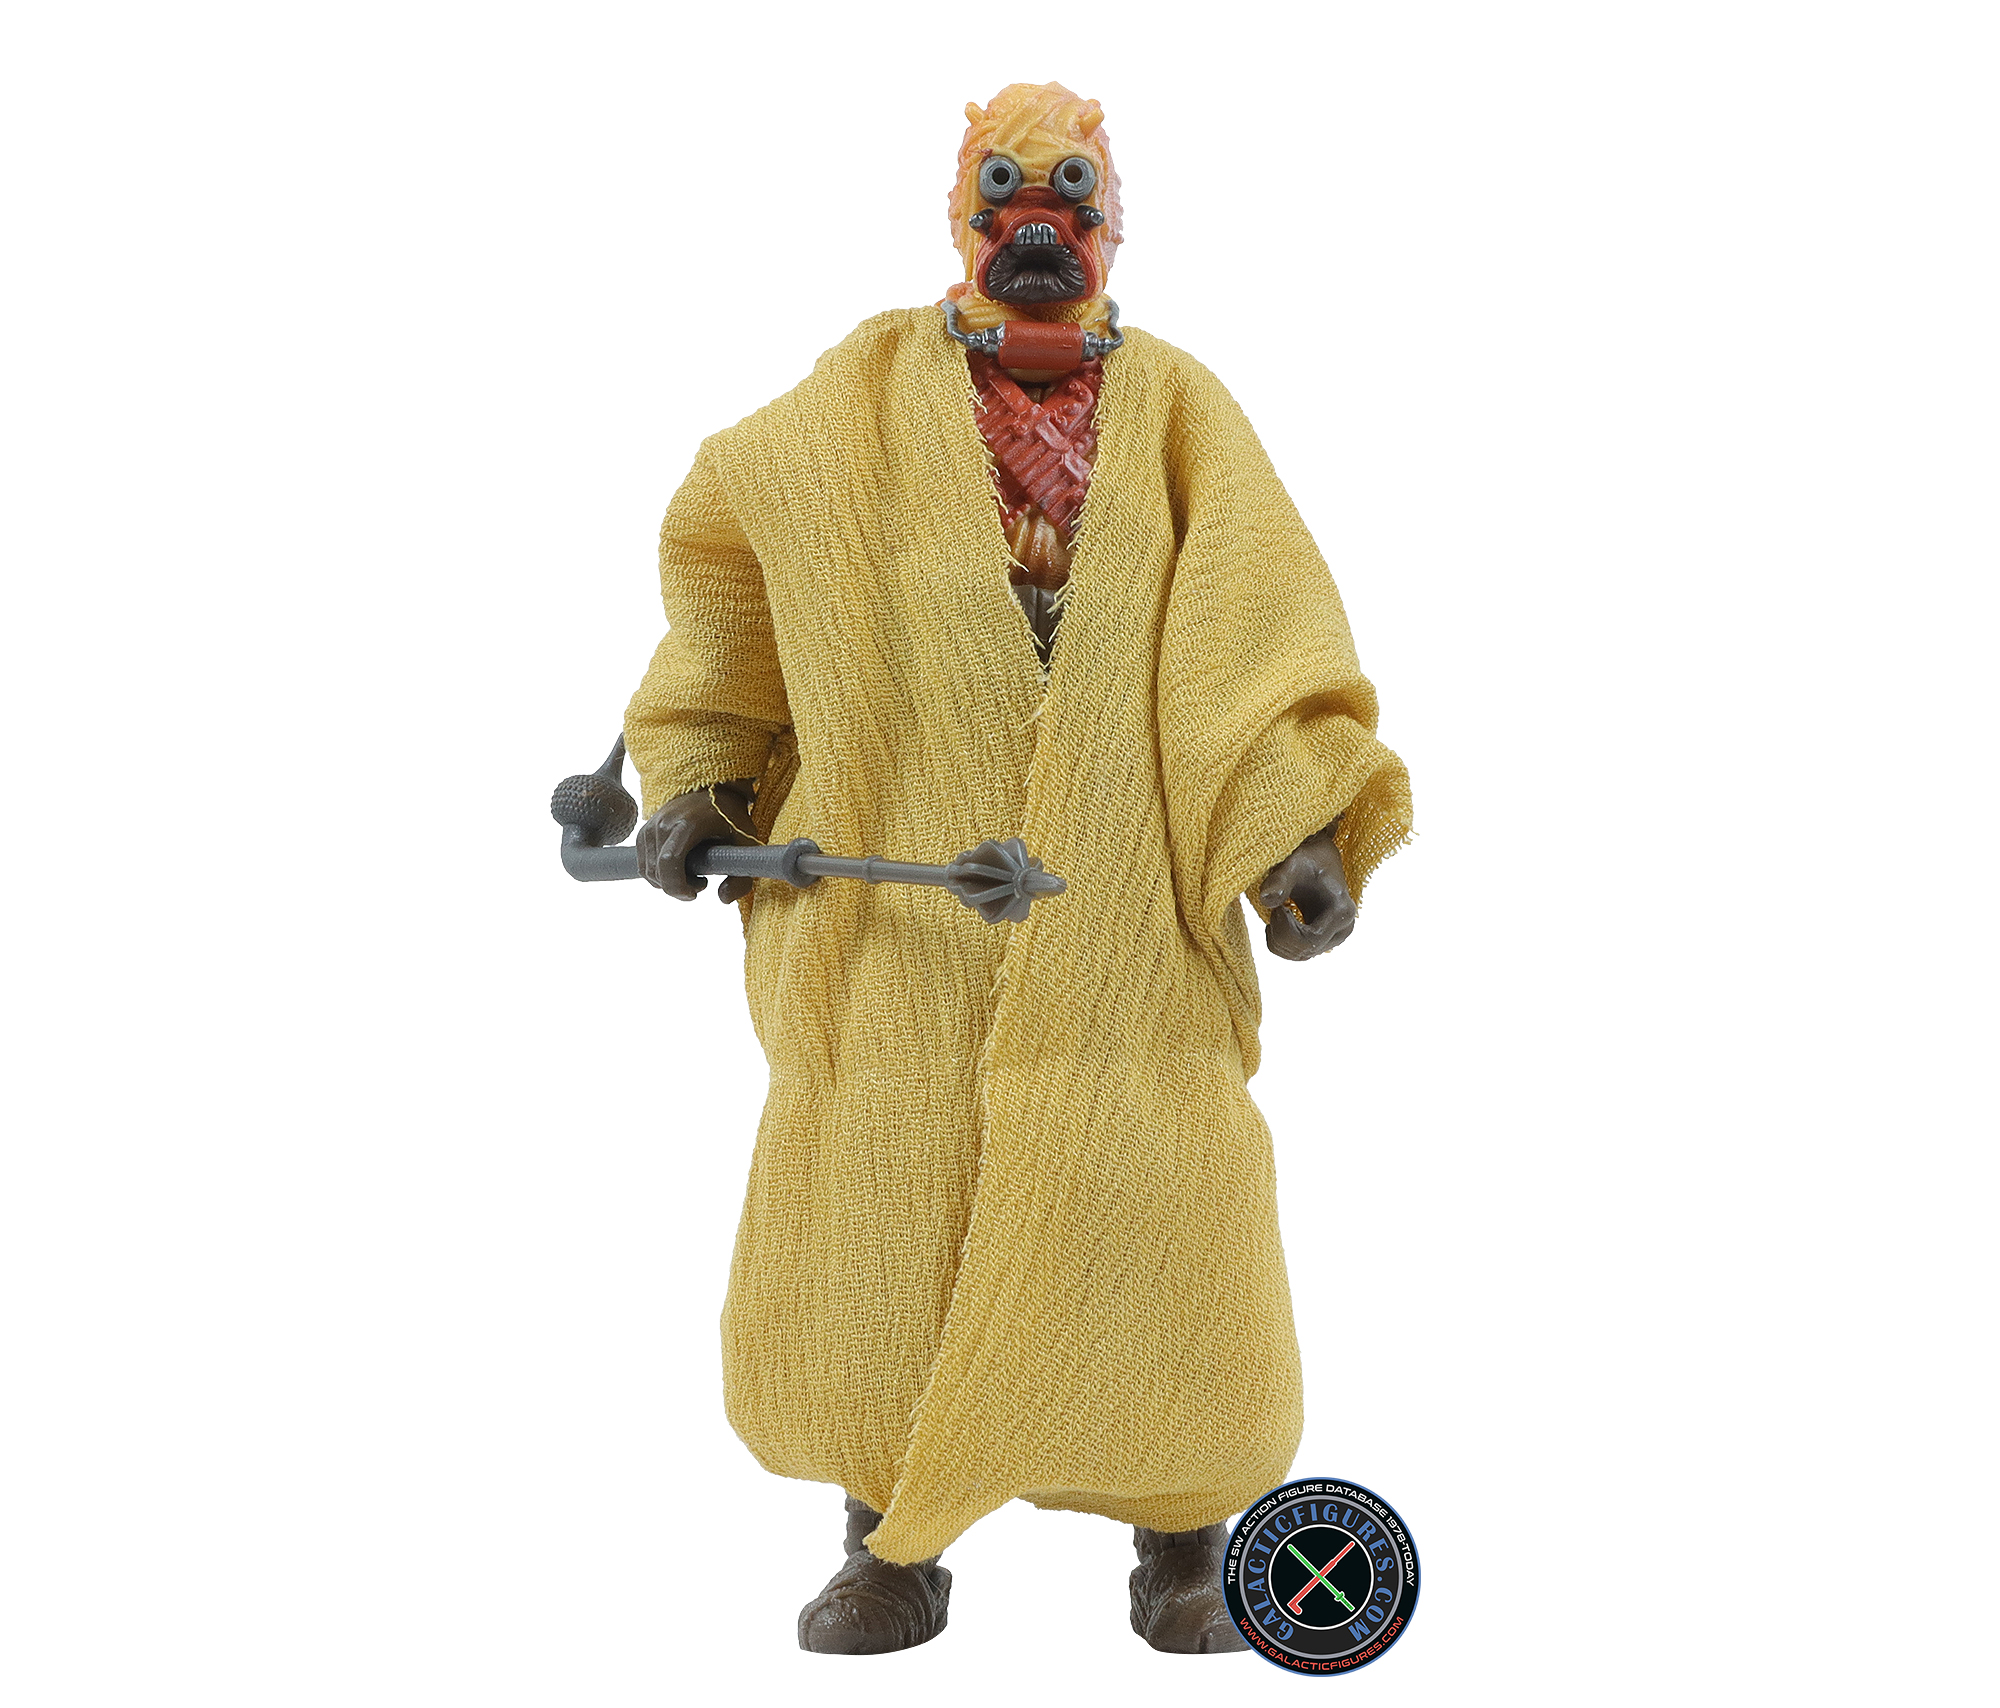 Tusken Raider The Credit Collection